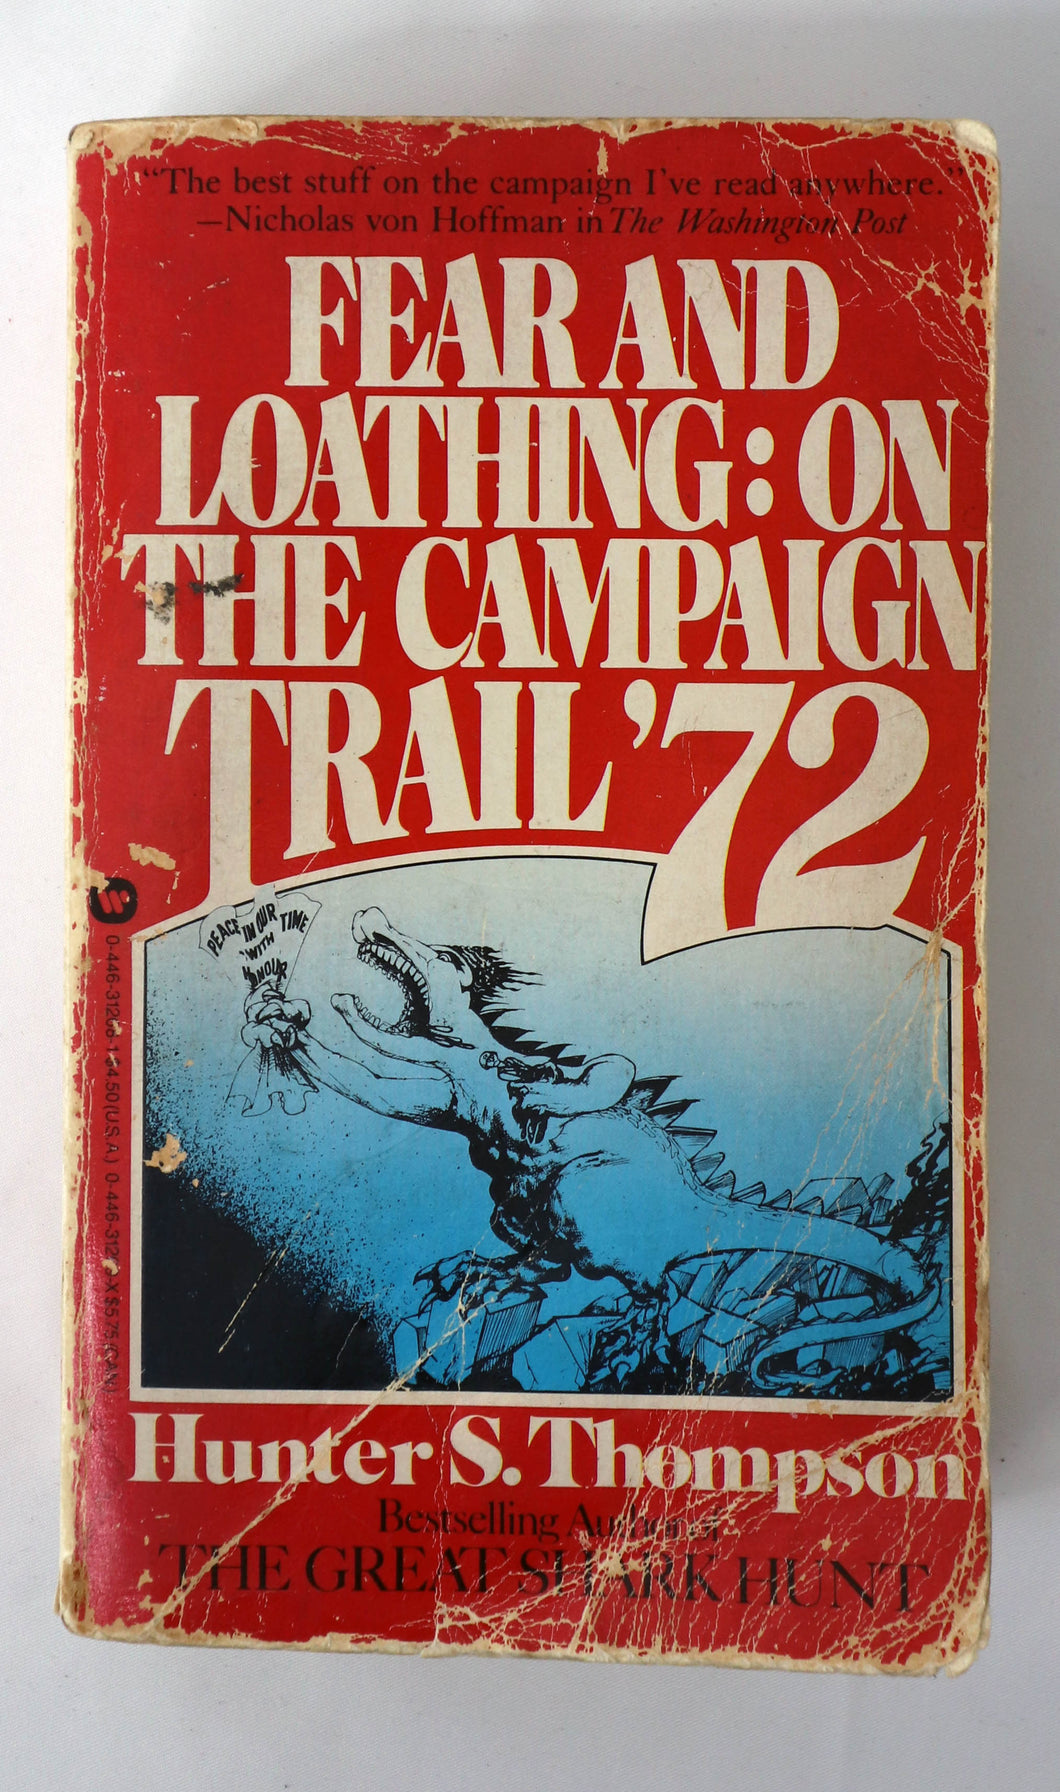 Book Non-Fiction Politics - Fear And Loathing:  On The Campaign Trail '72 - By Hunter S Thompson - Warner Books 1st Edition - USED - Paperback - Text W/ Photos - Gonzo Journalism